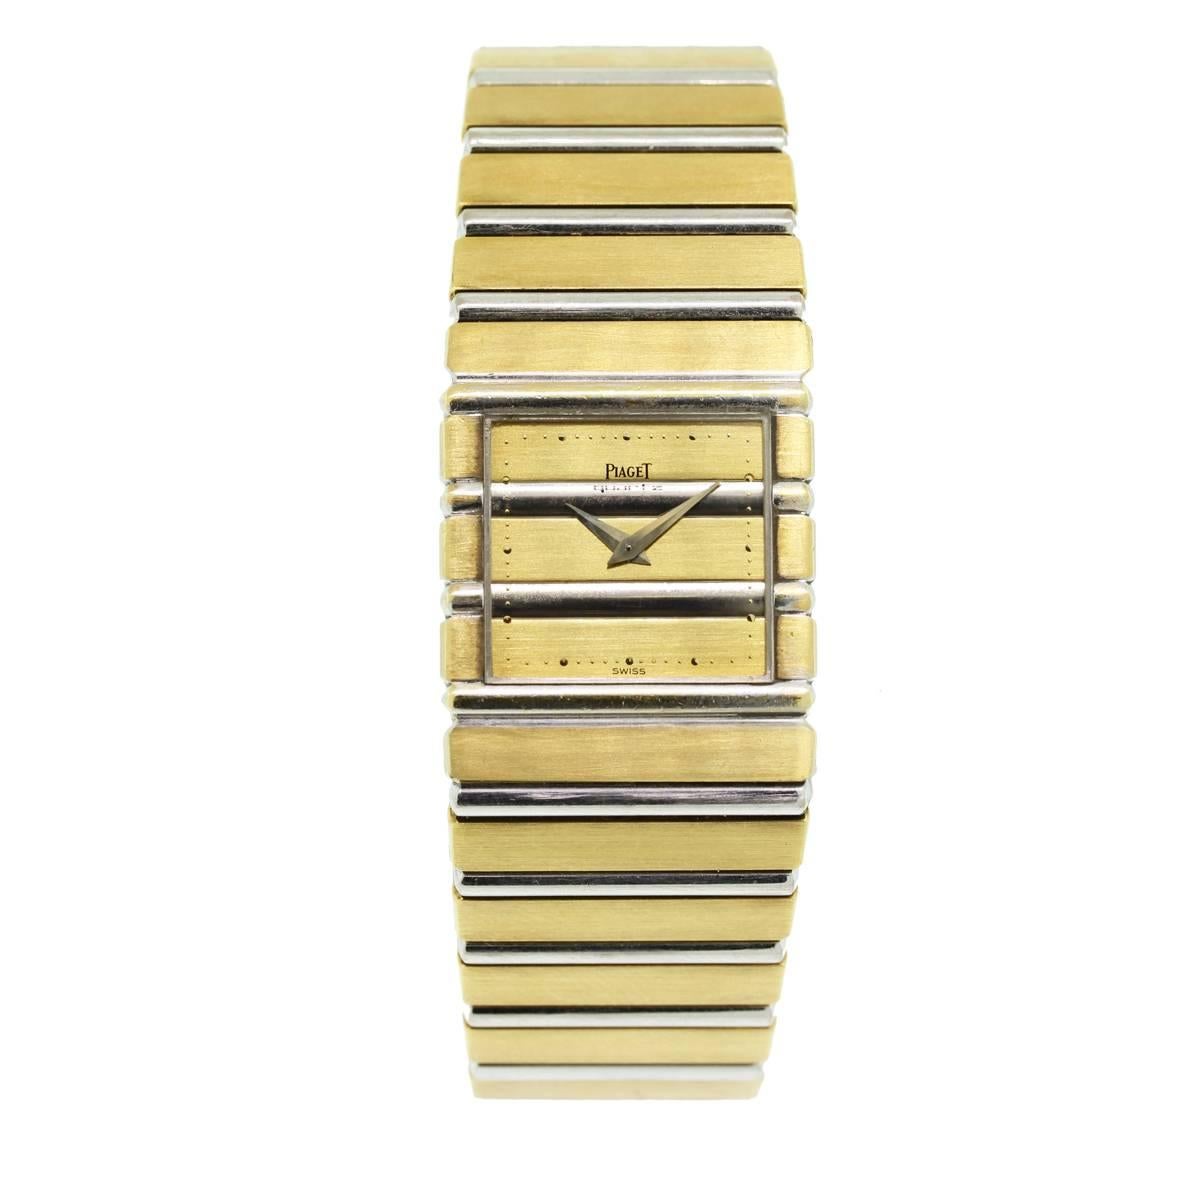 Brand	Piaget
Model	Polo
Case Measurement	24 mm x 20mm
Case Material	18k Yellow Gold and 18K White Gold
Dial	Gold
Bracelet	18k Yellow Gold and White Gold
Crystal	Scratch Resistant Sapphire
Movement	Quartz
Size	Will fit a 7.5" wrist
Box and